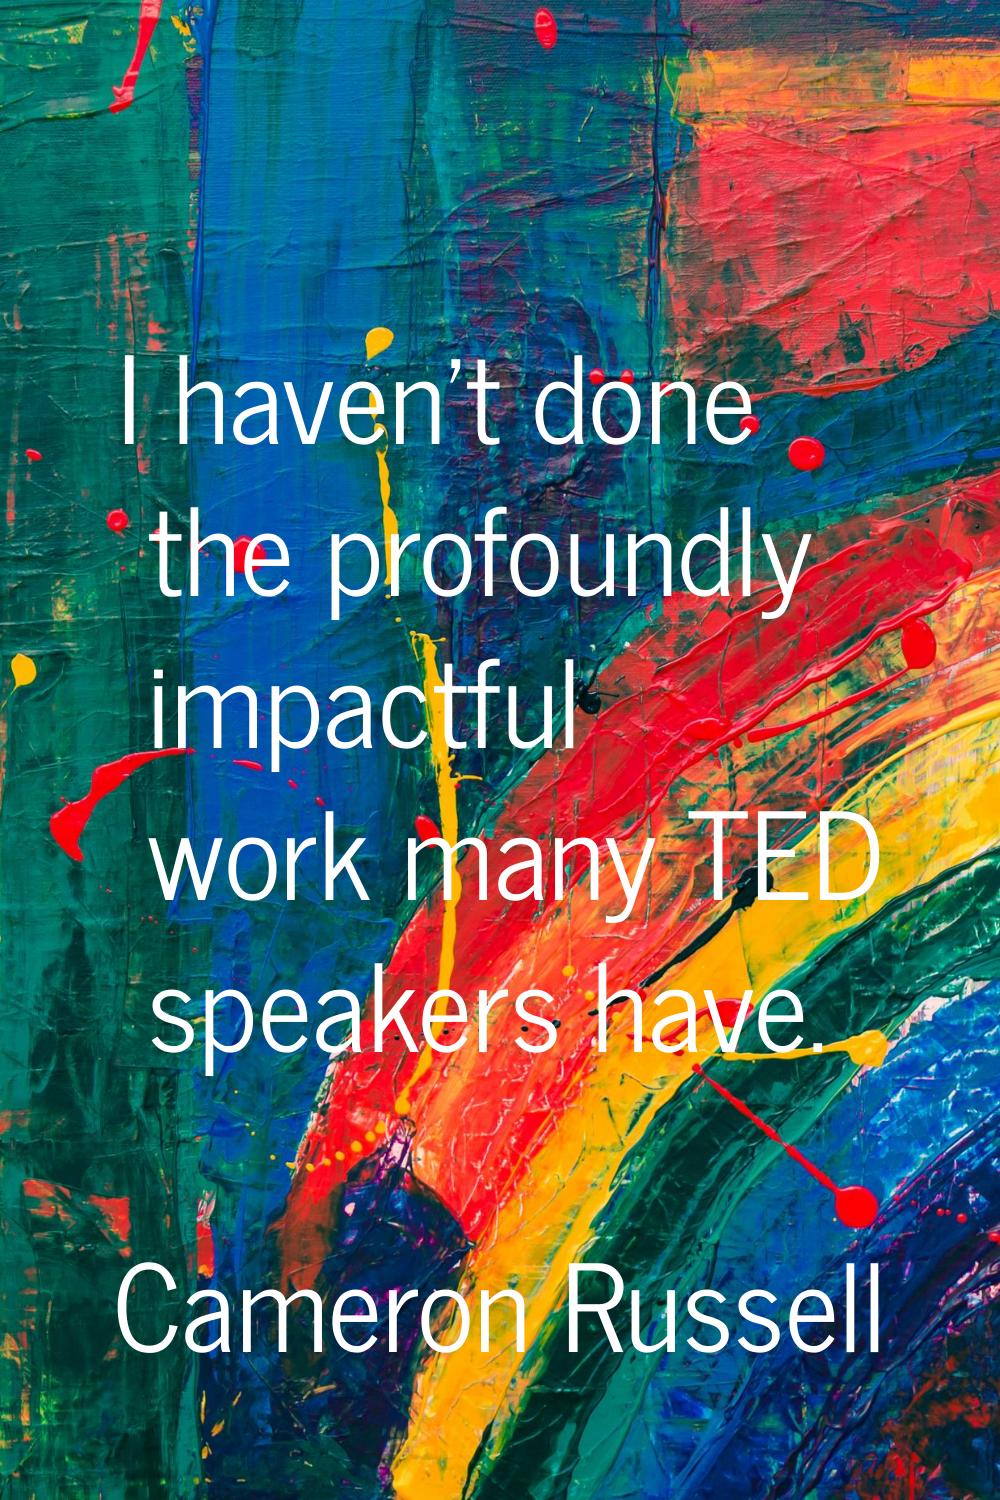 I haven't done the profoundly impactful work many TED speakers have.